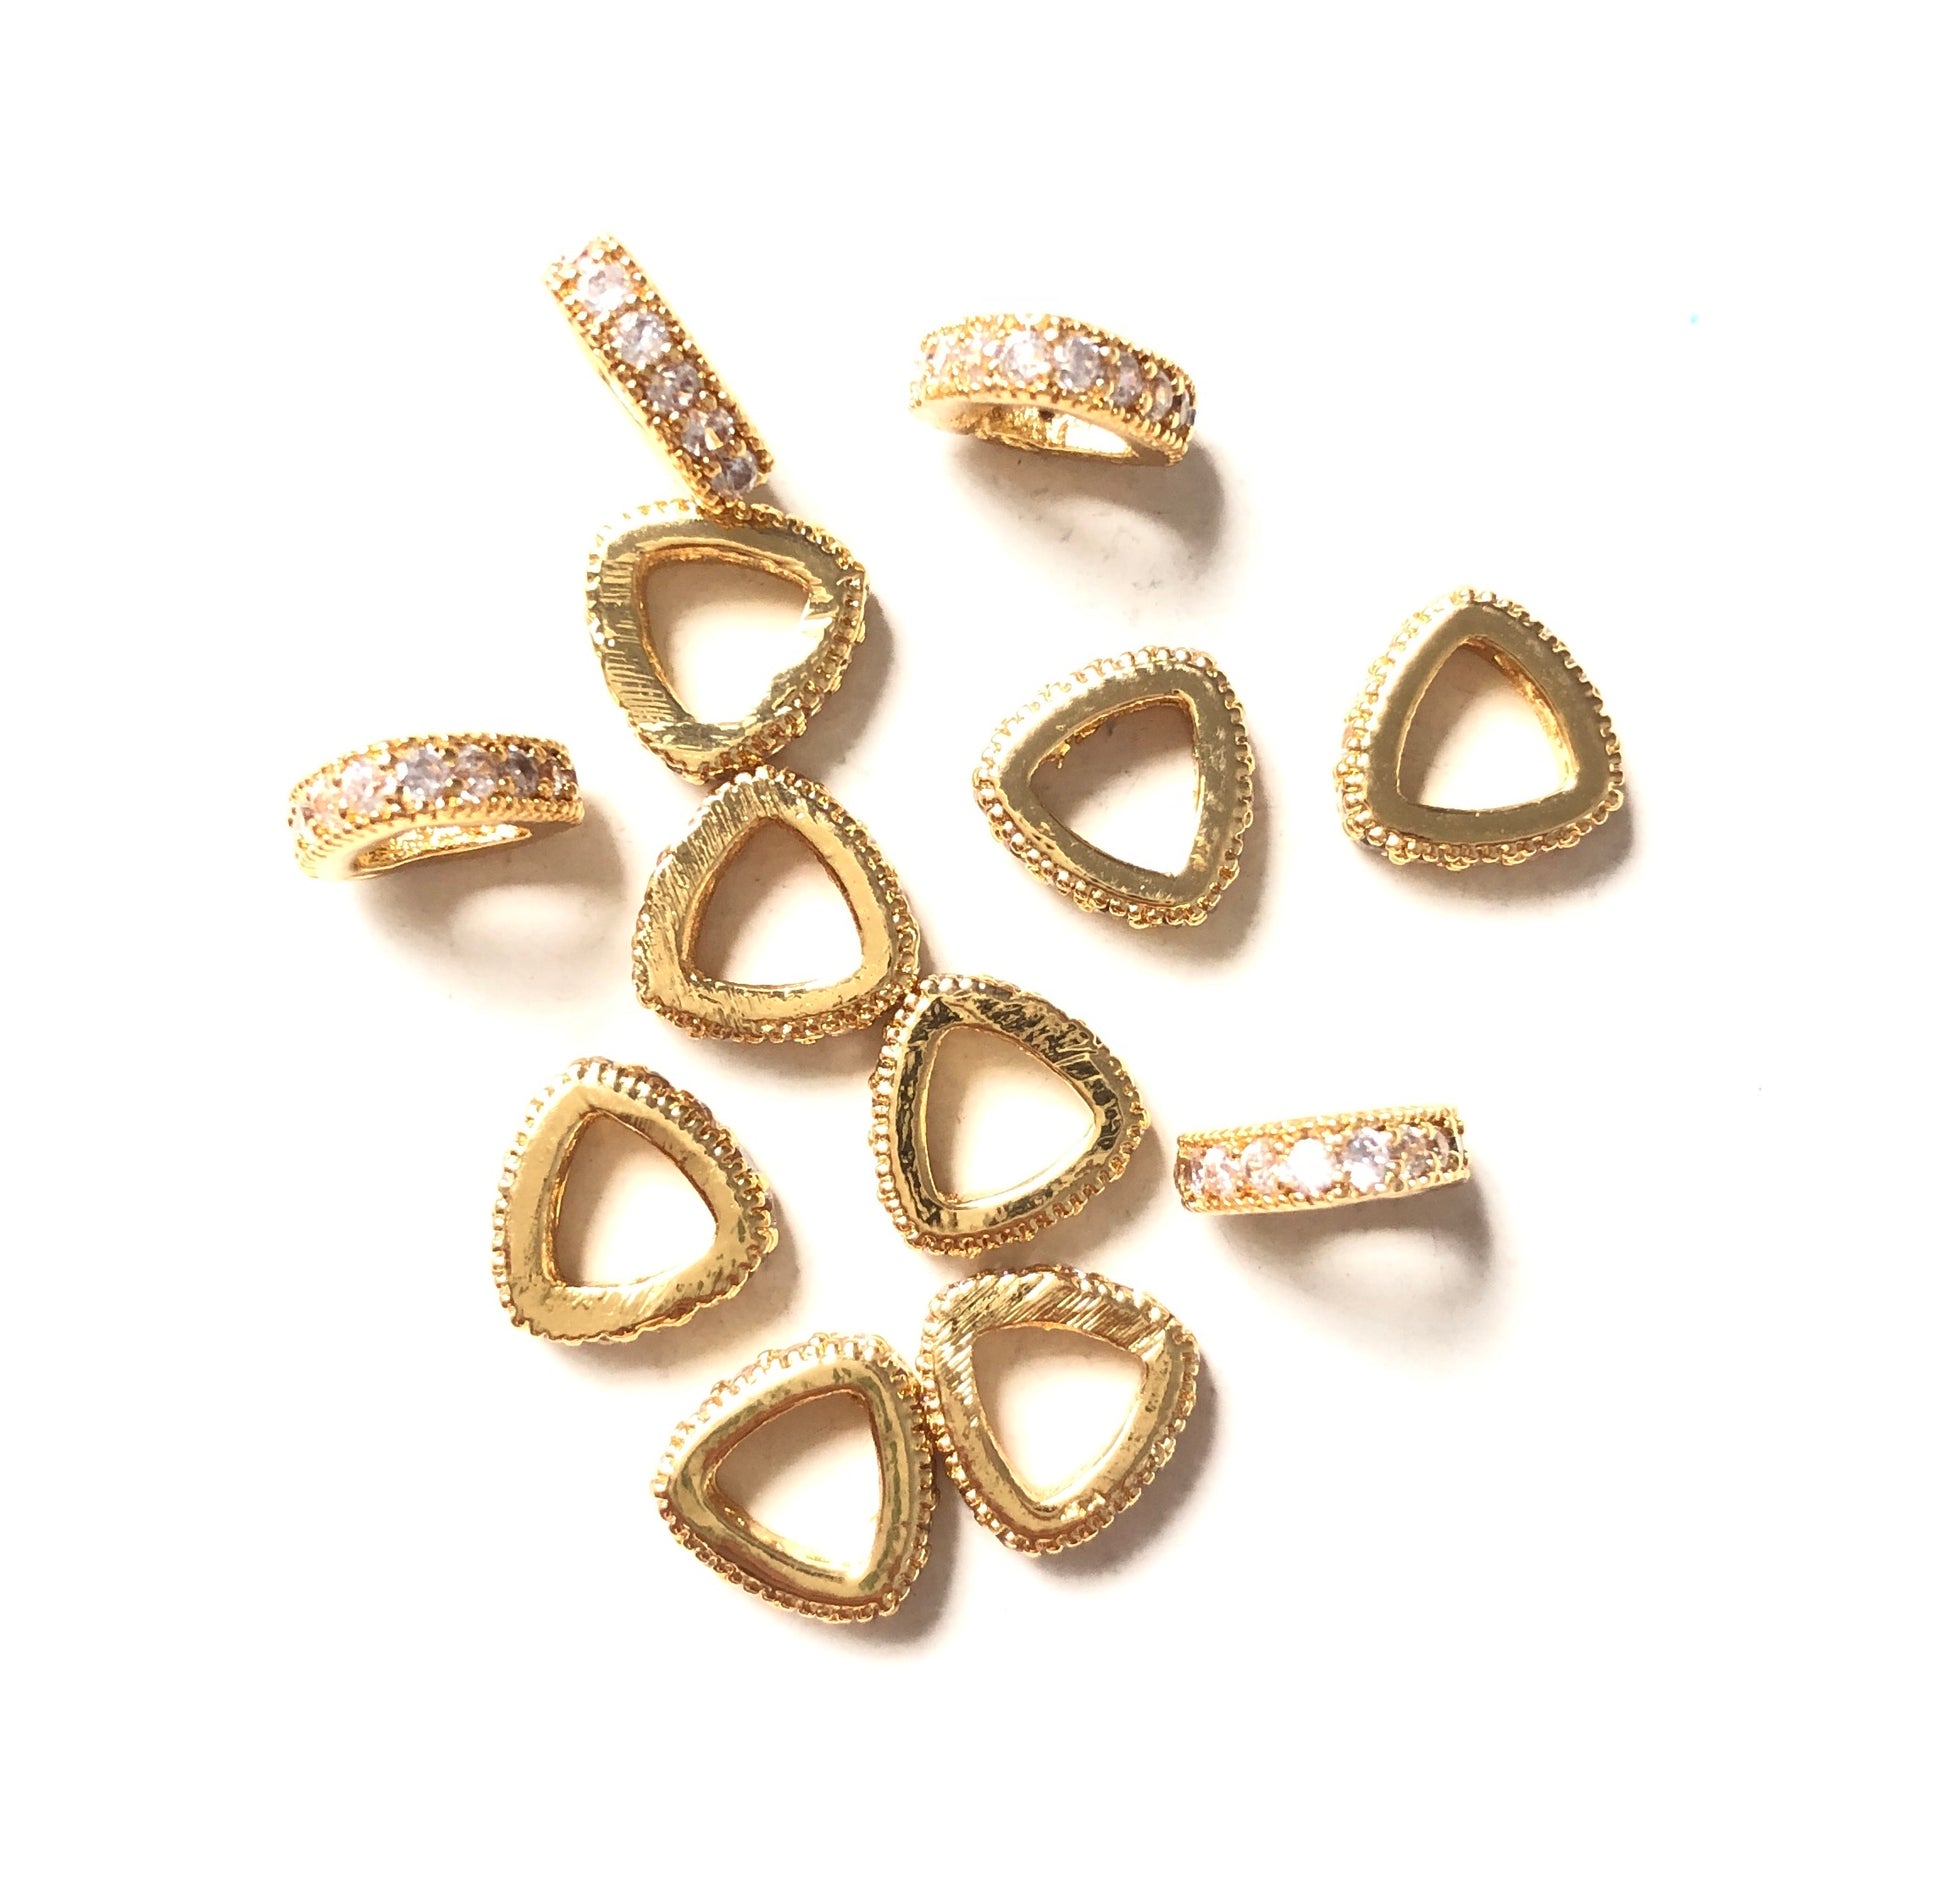 20pcs/lot 8*2.5mm CZ Paved Triangle Rondelle Spacers Gold CZ Paved Spacers Rondelle Beads Charms Beads Beyond